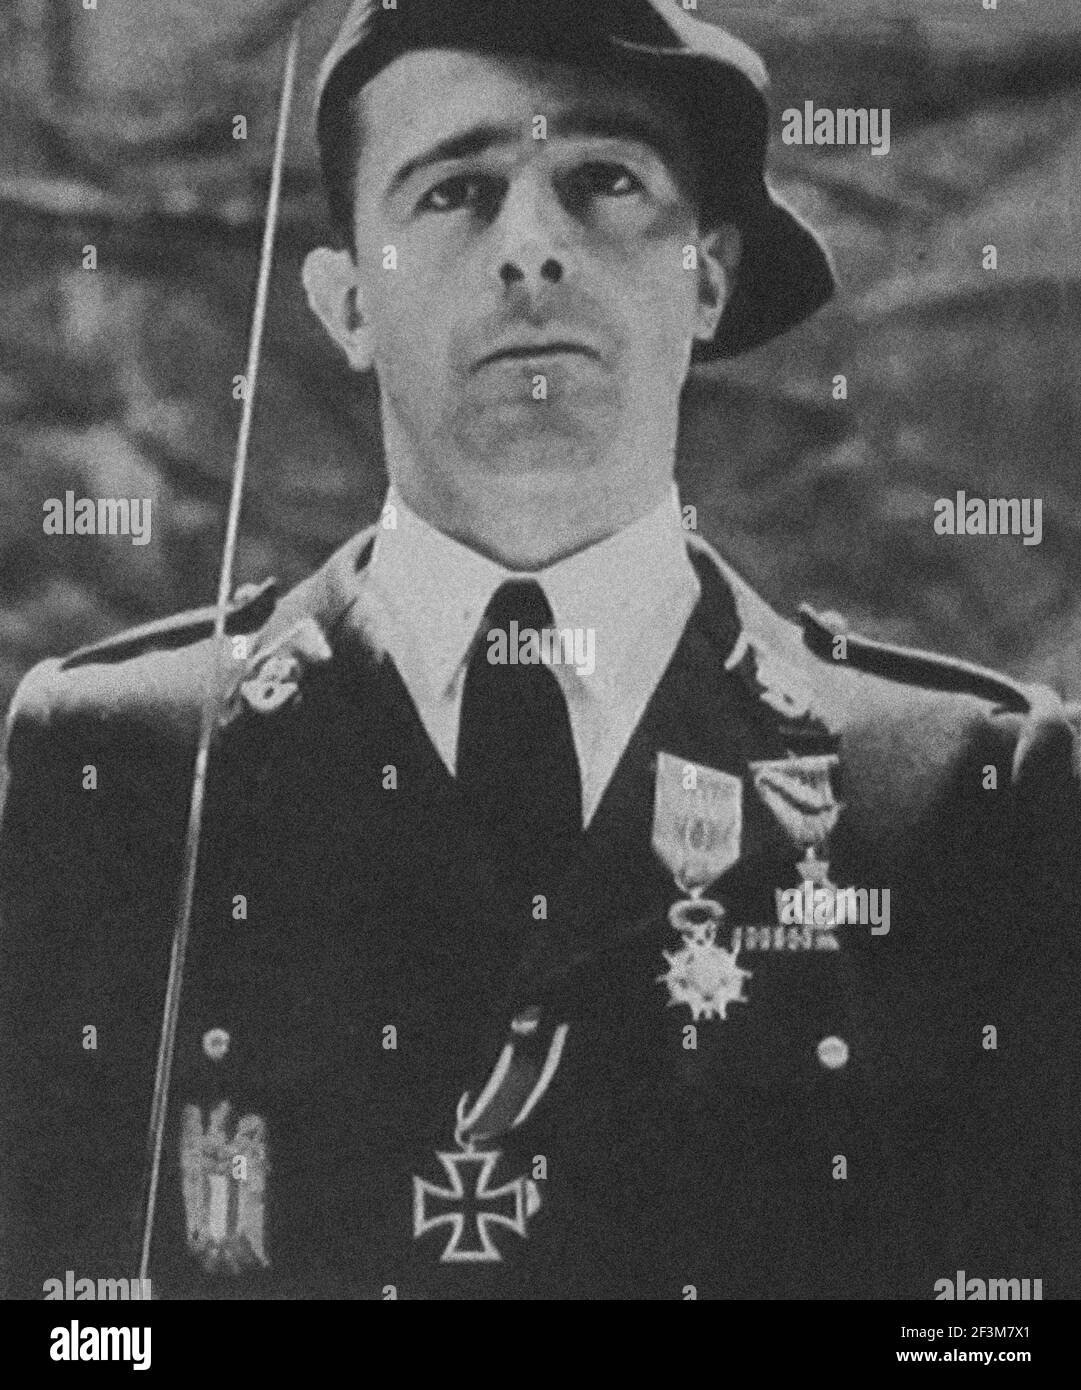 World War II period from German propaganda news. France. 1943 Captain Demessine of the L. V. F. Ayant (Légion des Volontaires Française de Tunisie / L Stock Photo